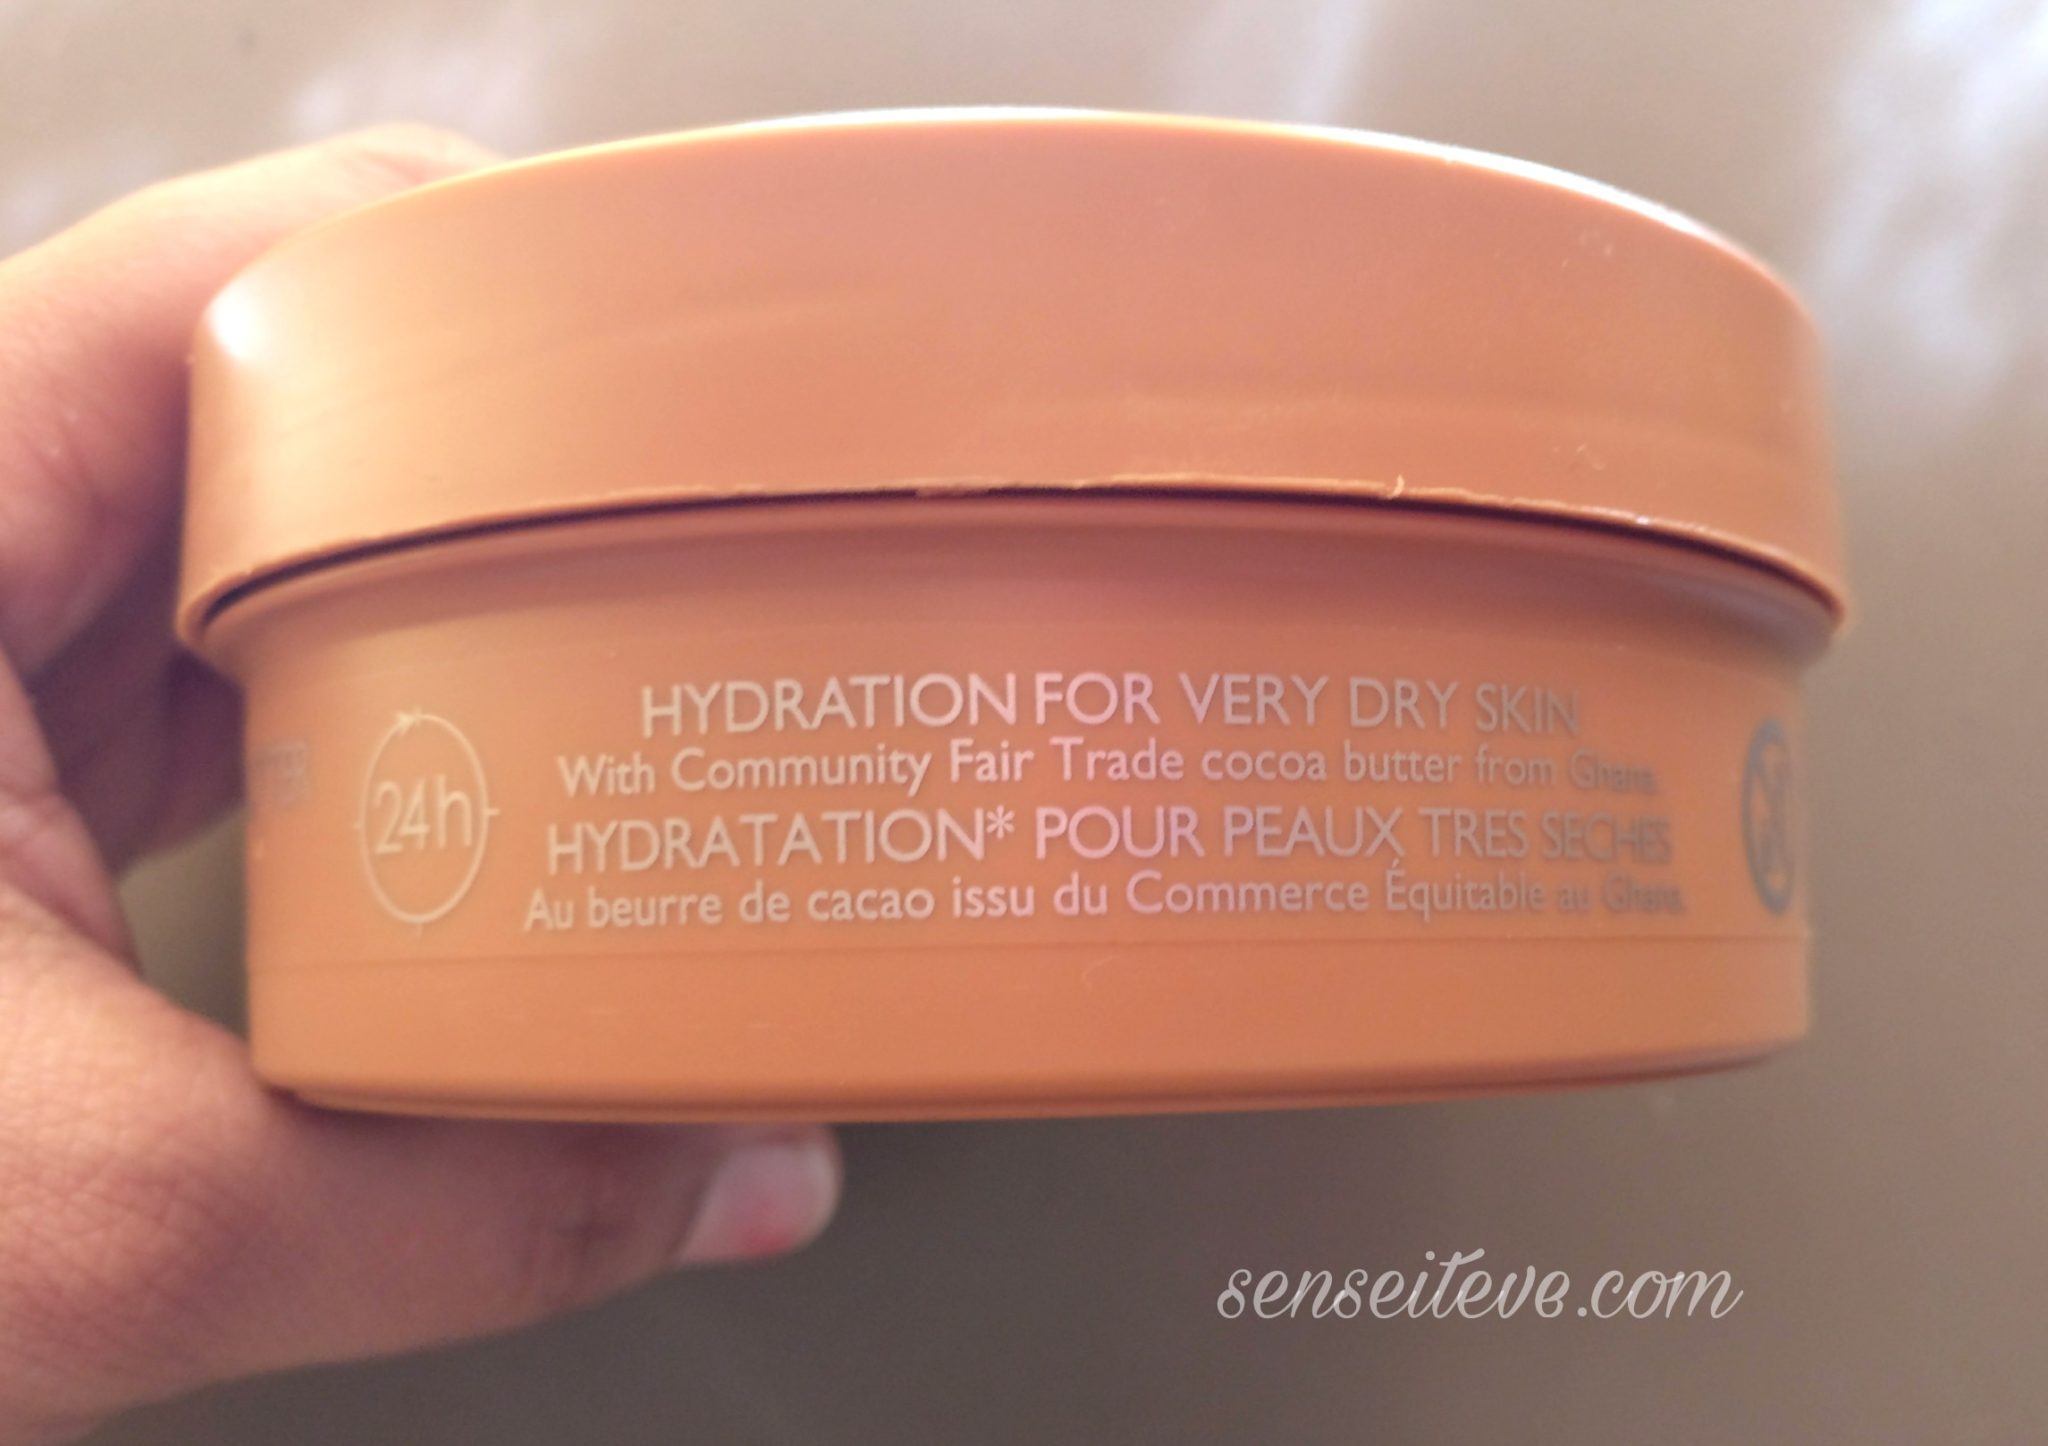 The Body Shop Cocoa Butter Body Butter For very dry skin Sense It Eve The Body Shop Cocoa Butter Body Butter Review